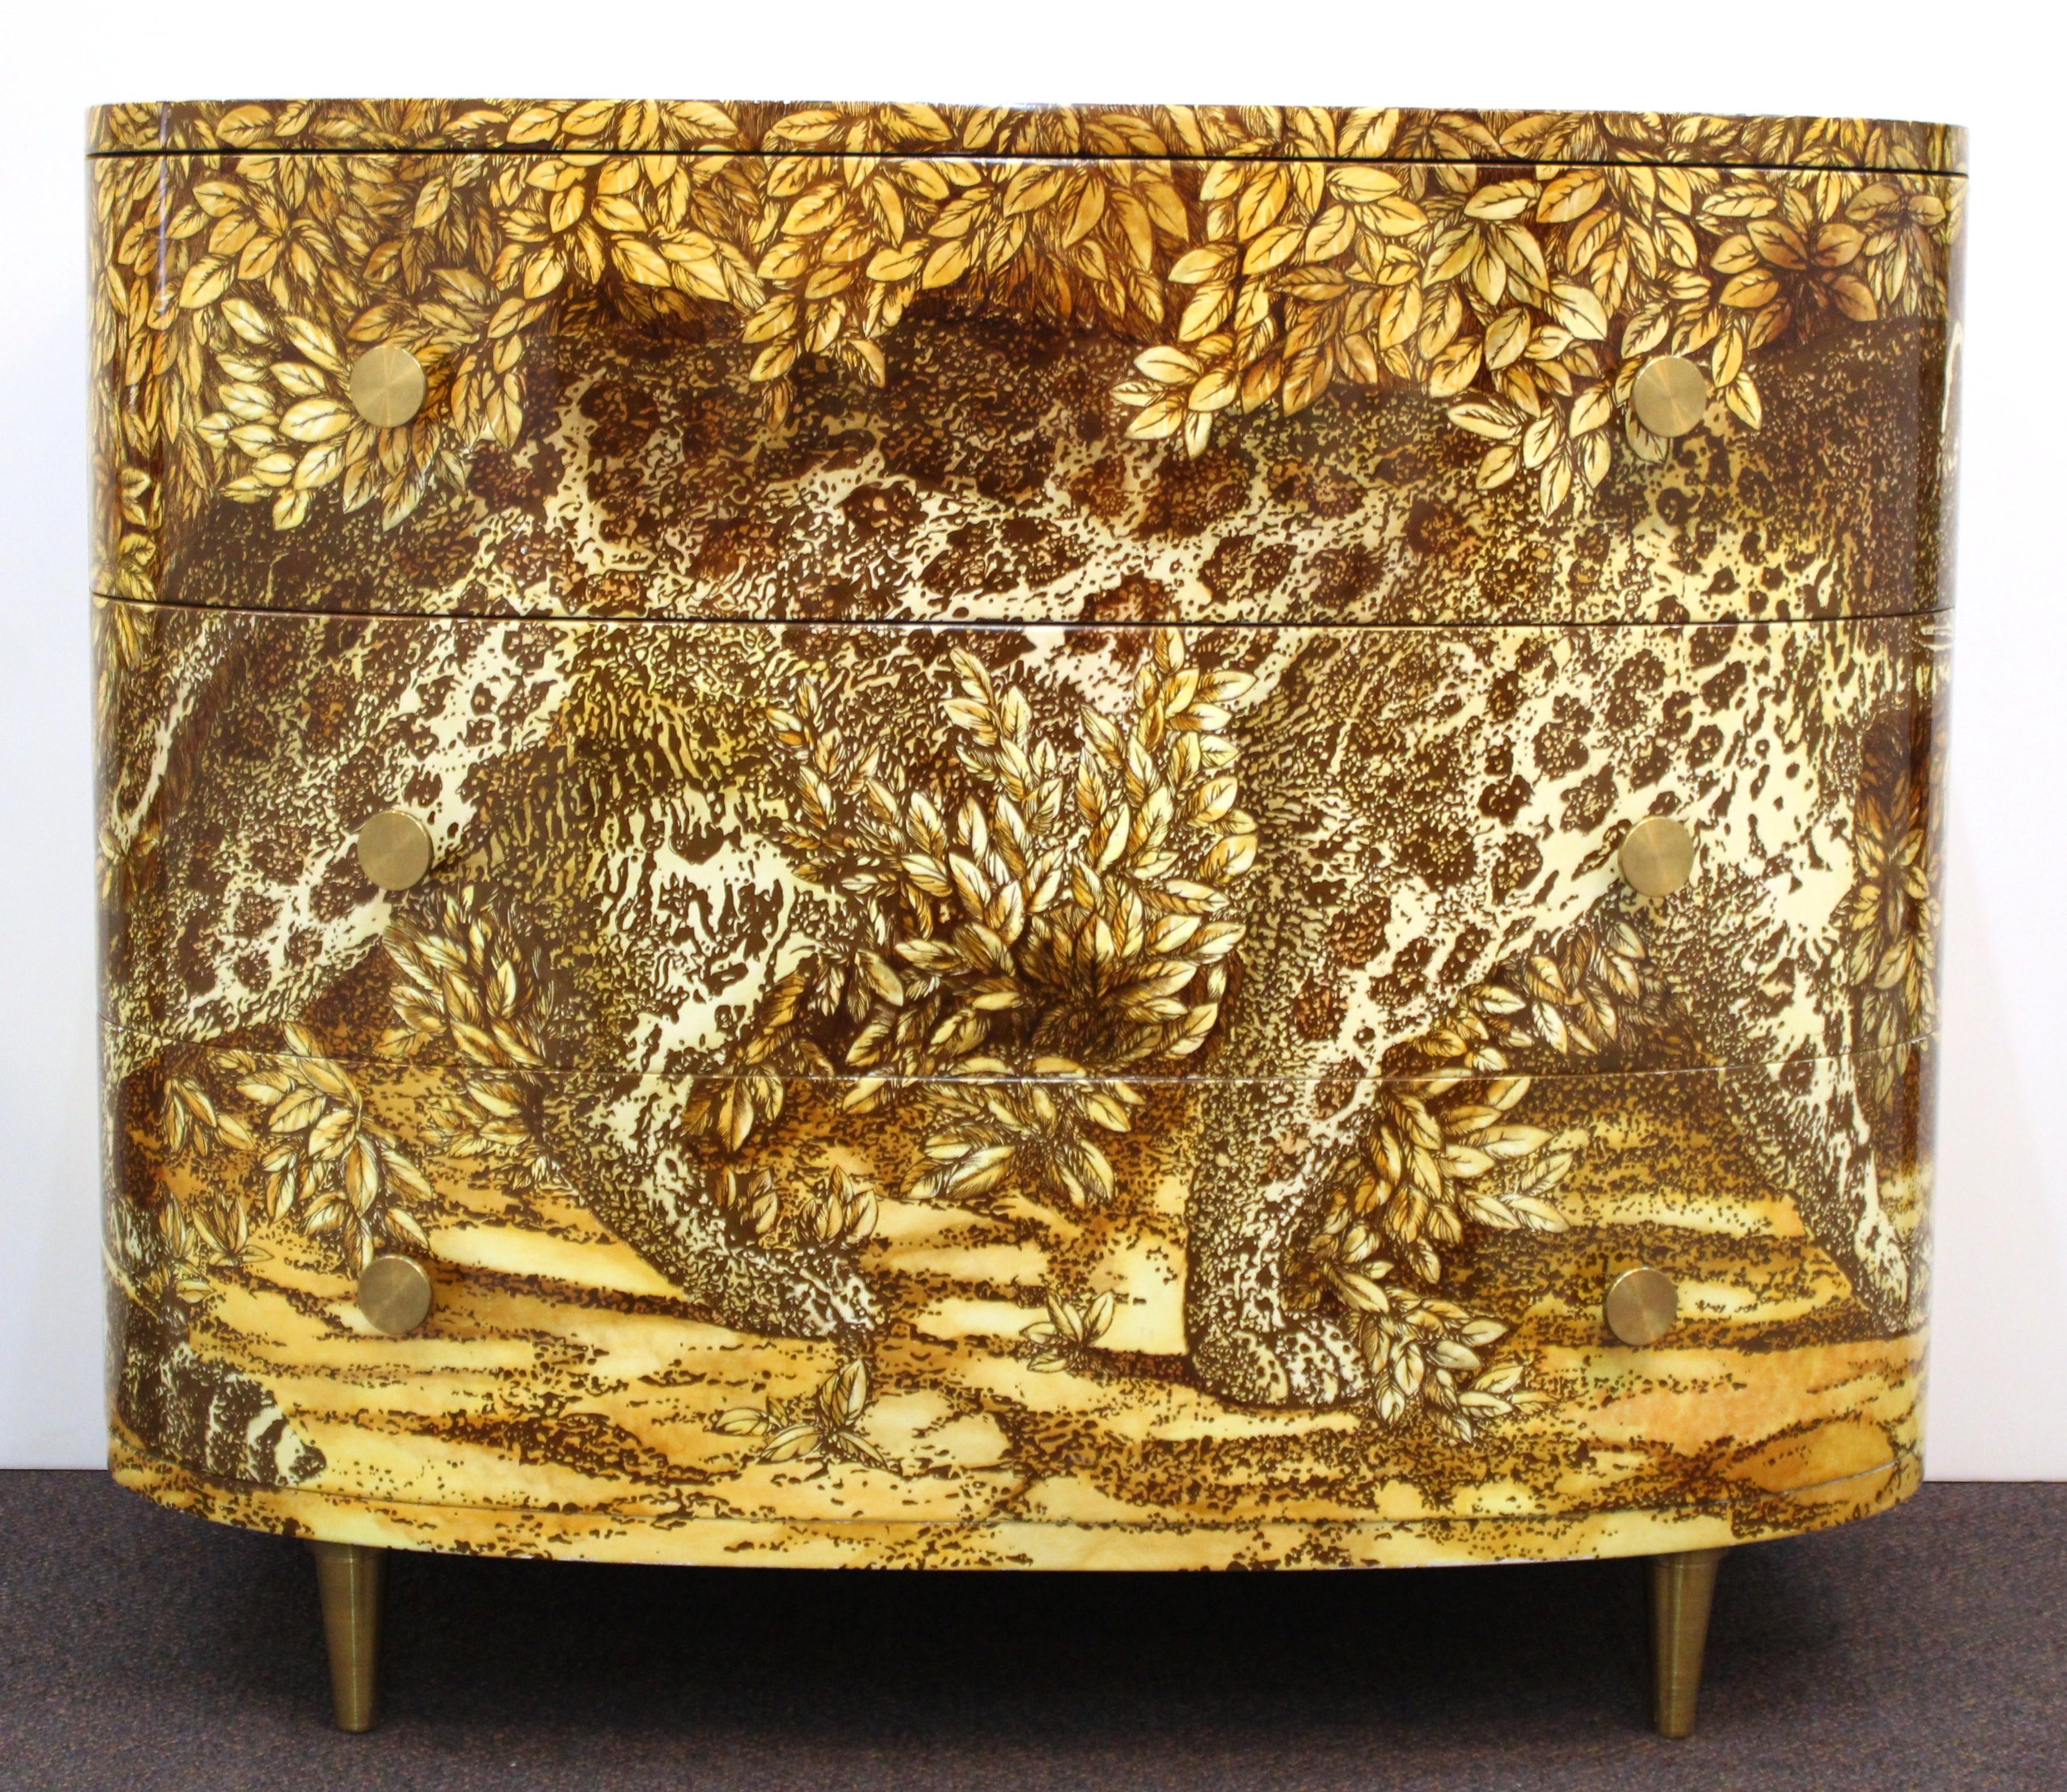 Italian modern Fornasetti 'Leopardo' curved chest of drawers or commode with lithographed, hand-colored and lacquered leopard design on wood and with brass hardware. Fornasetti makers label on the upper front edge of the upper drawer. Marked